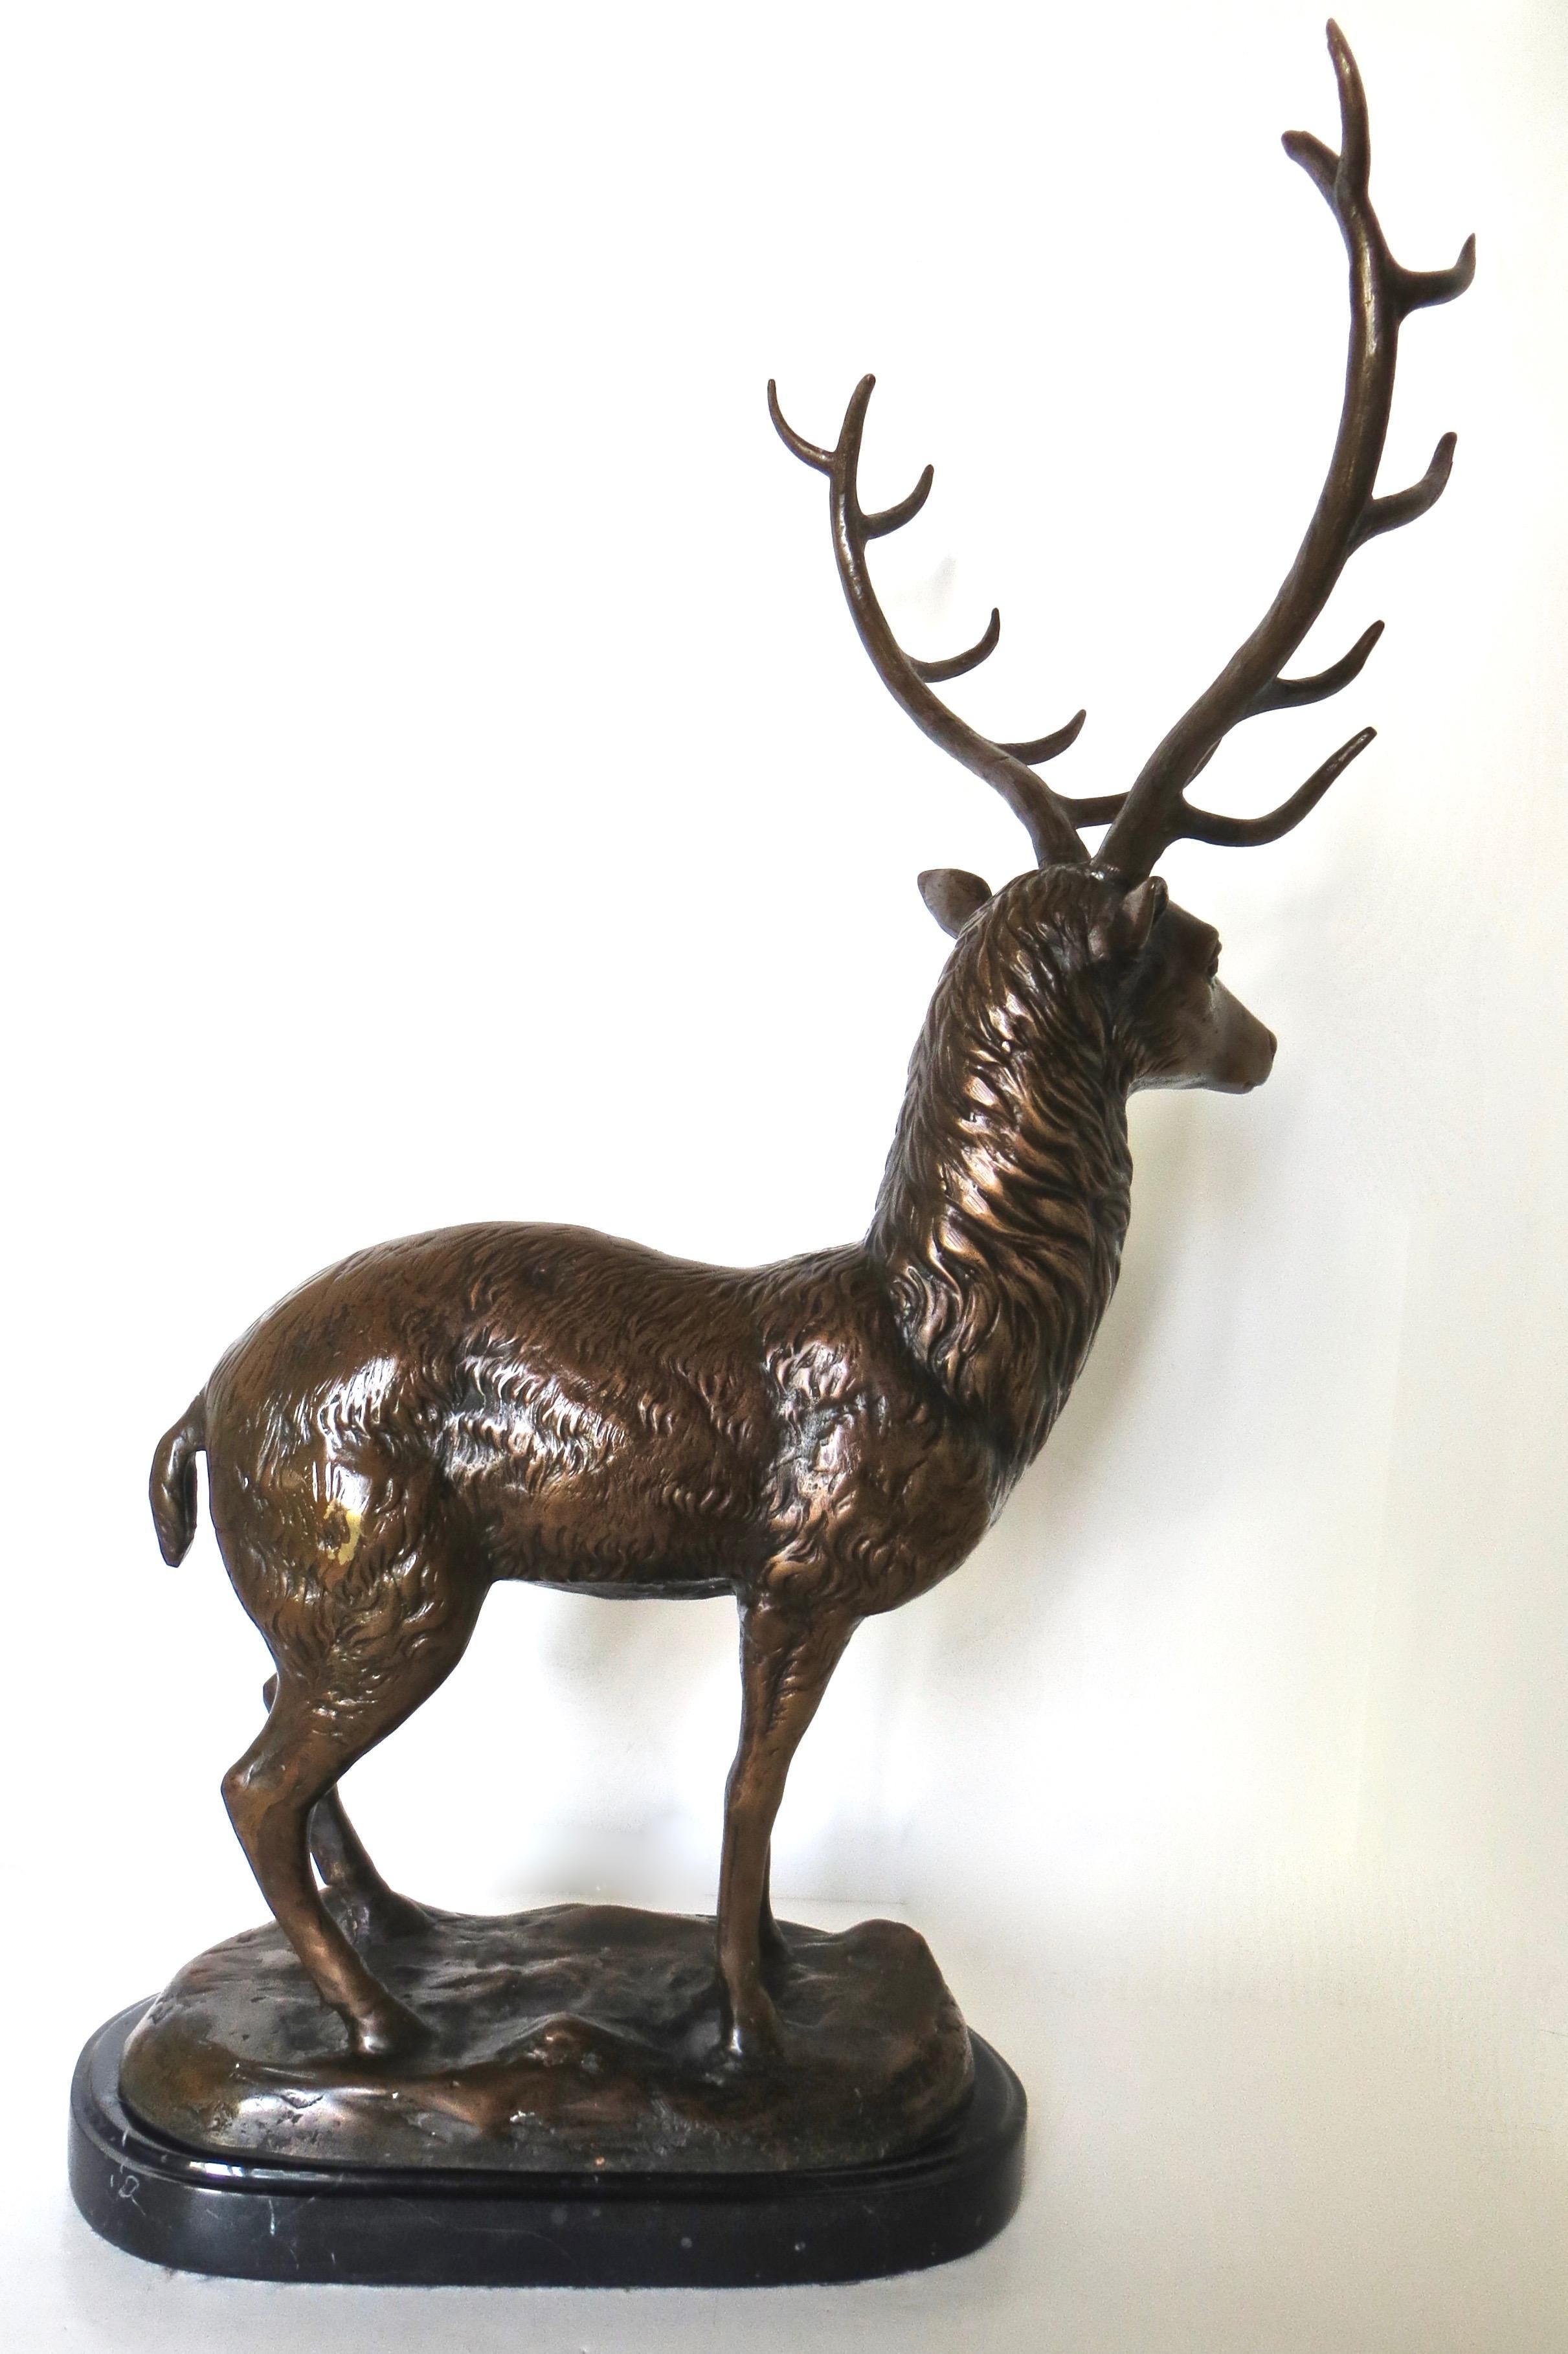 Large unsigned deer cast bronze stands prominently on a black veined marble base, seemingly surveying the landscape. With a twelve point rack between two large antlers, this deer bronze is quite well made with attention to detail on his fur coat and